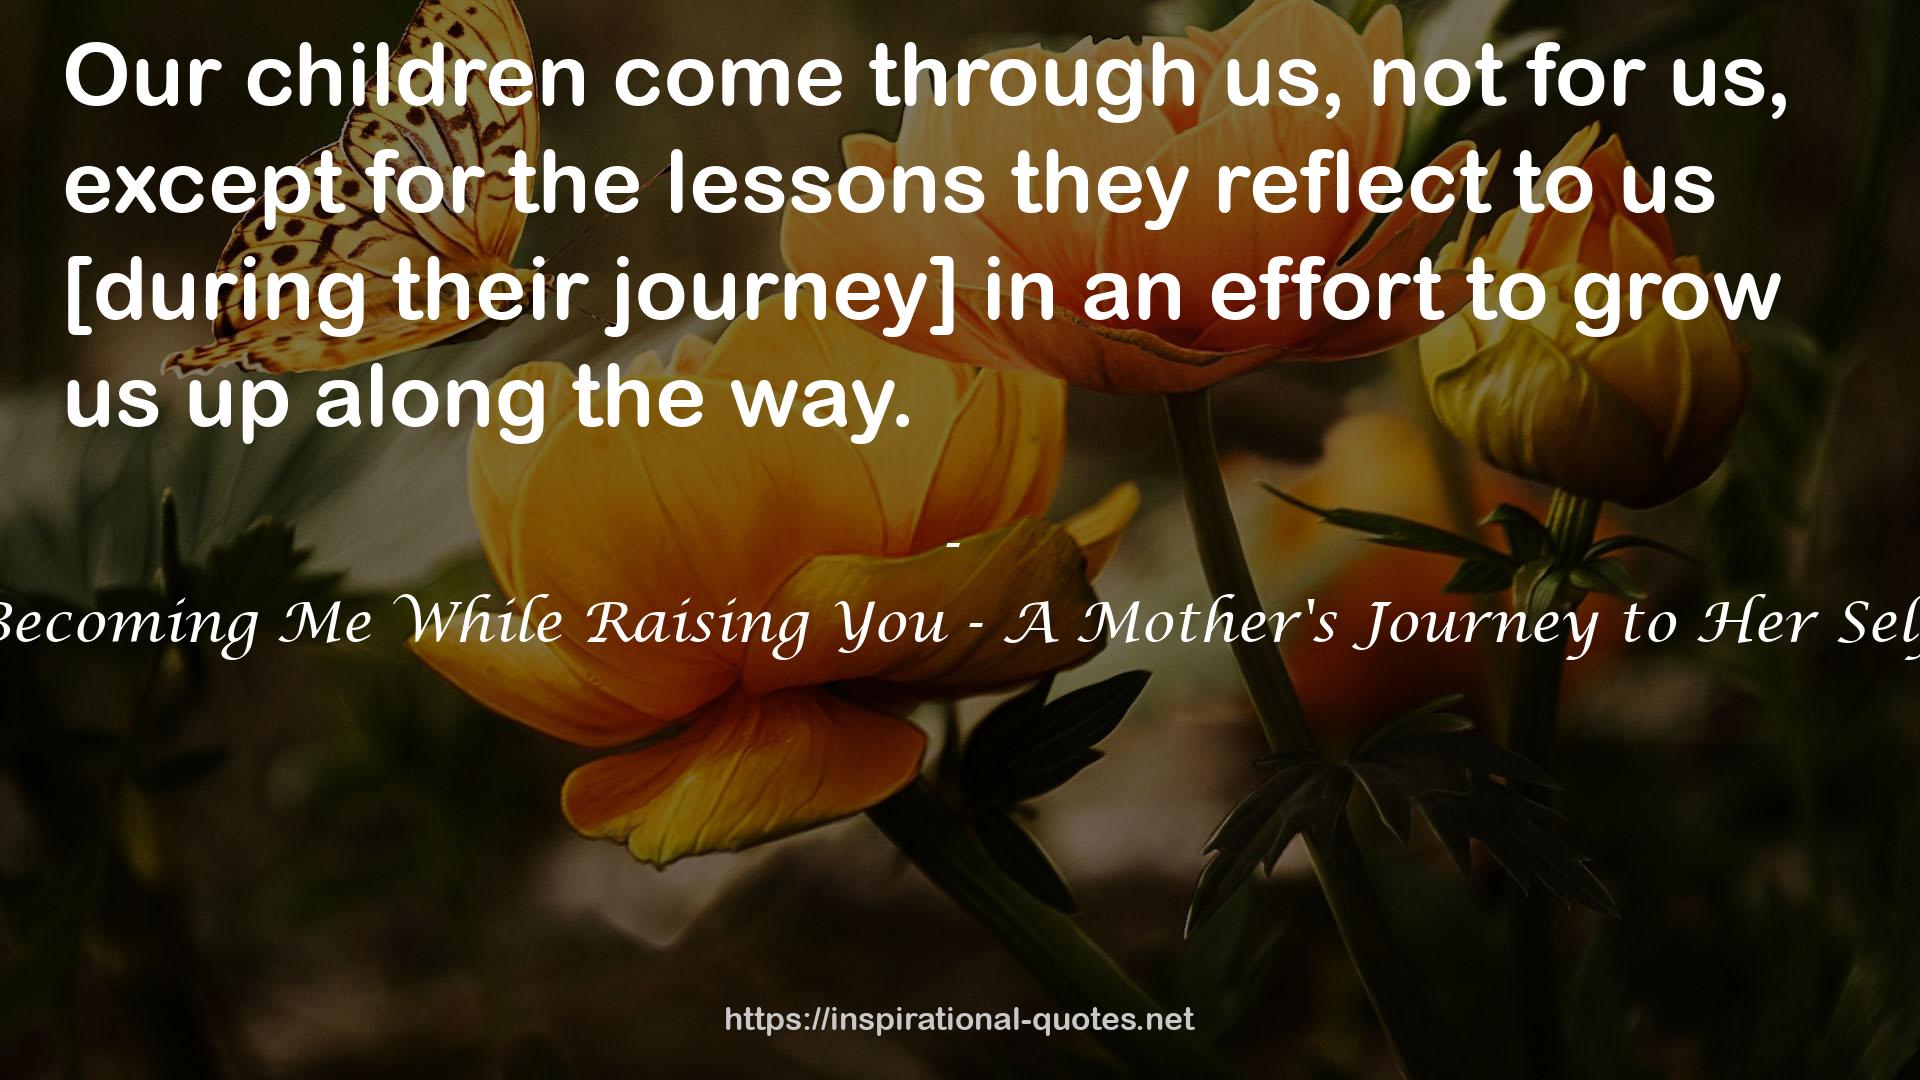 Becoming Me While Raising You - A Mother's Journey to Her Self QUOTES